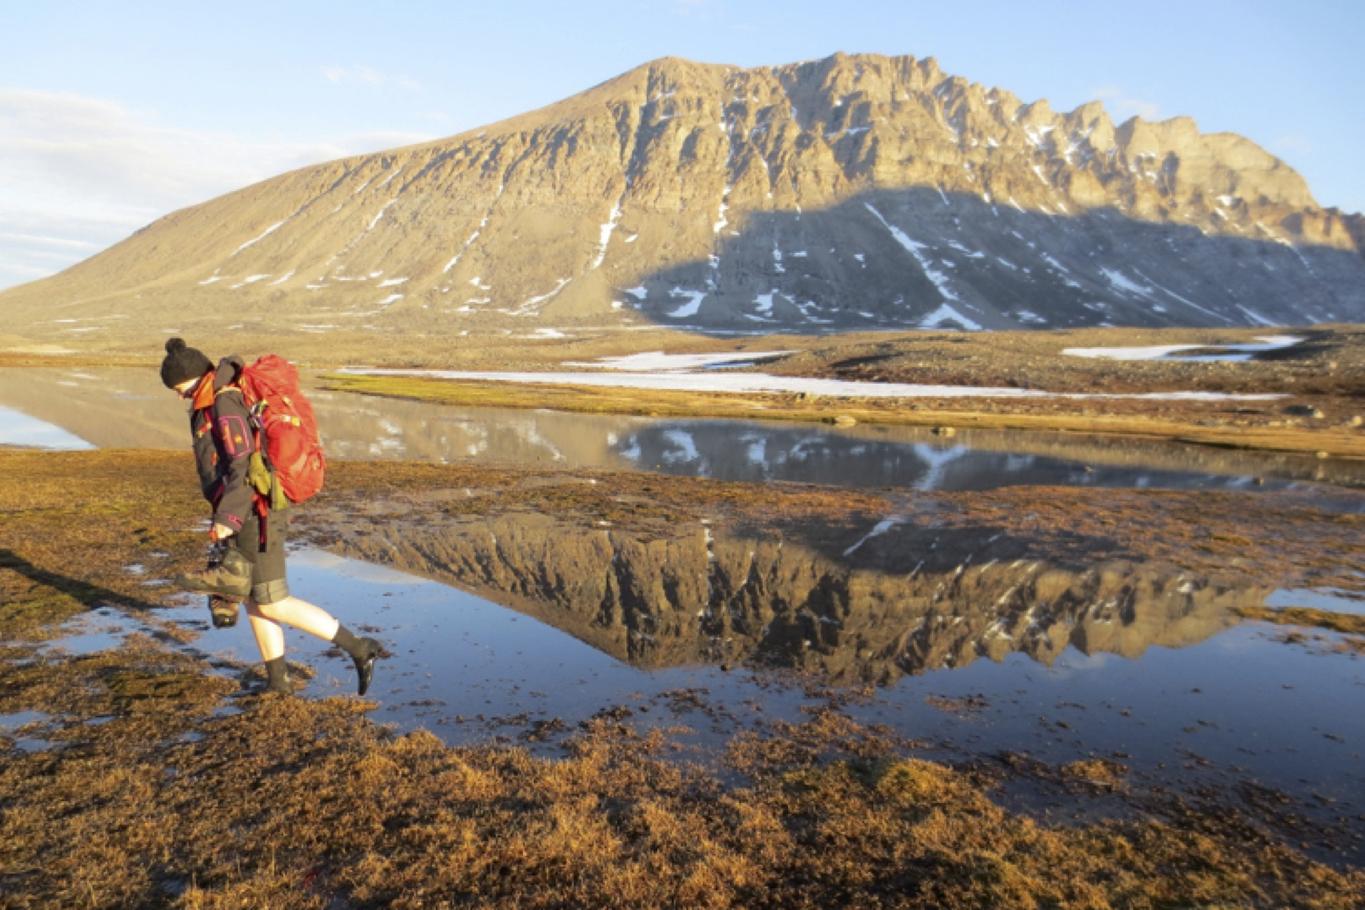 &#13;
The boggy regions are home to underlying permafrost&#13;